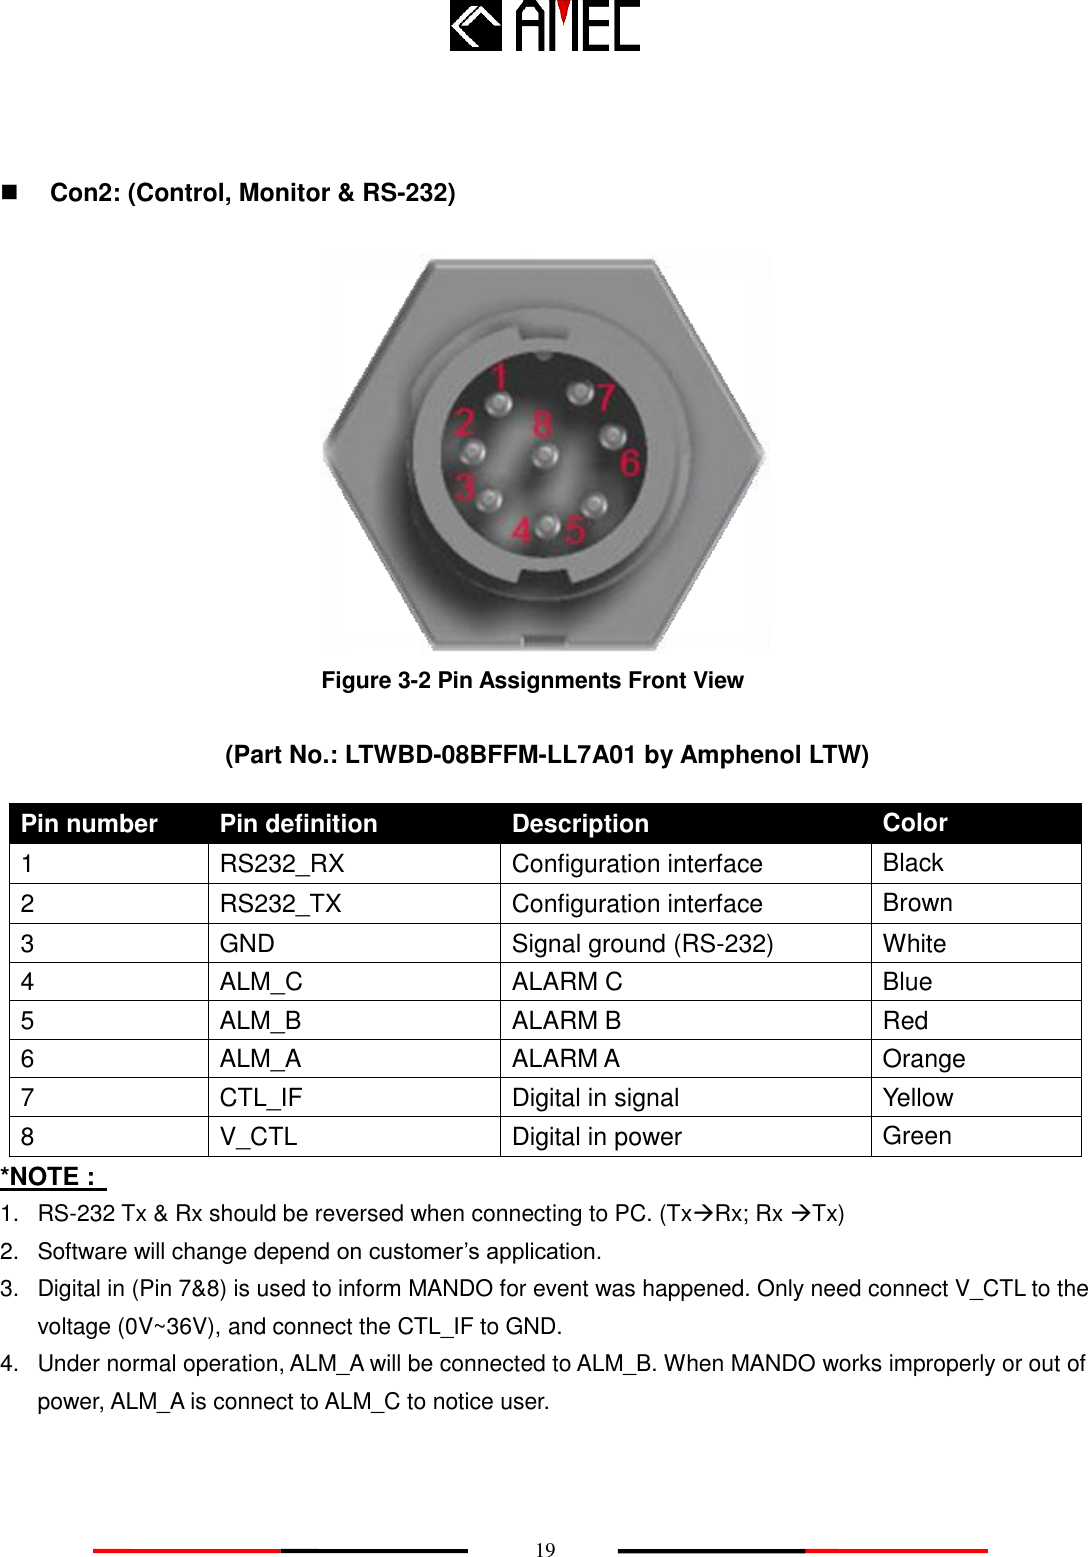    19    Con2: (Control, Monitor &amp; RS-232)   Figure 3-2 Pin Assignments Front View  (Part No.: LTWBD-08BFFM-LL7A01 by Amphenol LTW) Pin number Pin definition Description Color 1 RS232_RX Configuration interface Black 2 RS232_TX Configuration interface Brown 3 GND Signal ground (RS-232) White 4 ALM_C ALARM C Blue 5 ALM_B ALARM B Red 6 ALM_A ALARM A Orange 7 CTL_IF Digital in signal Yellow 8 V_CTL Digital in power Green *NOTE :   1. RS-232 Tx &amp; Rx should be reversed when connecting to PC. (TxRx; Rx Tx) 2.  Software will change depend on customer’s application. 3.  Digital in (Pin 7&amp;8) is used to inform MANDO for event was happened. Only need connect V_CTL to the voltage (0V~36V), and connect the CTL_IF to GND. 4.  Under normal operation, ALM_A will be connected to ALM_B. When MANDO works improperly or out of power, ALM_A is connect to ALM_C to notice user.  